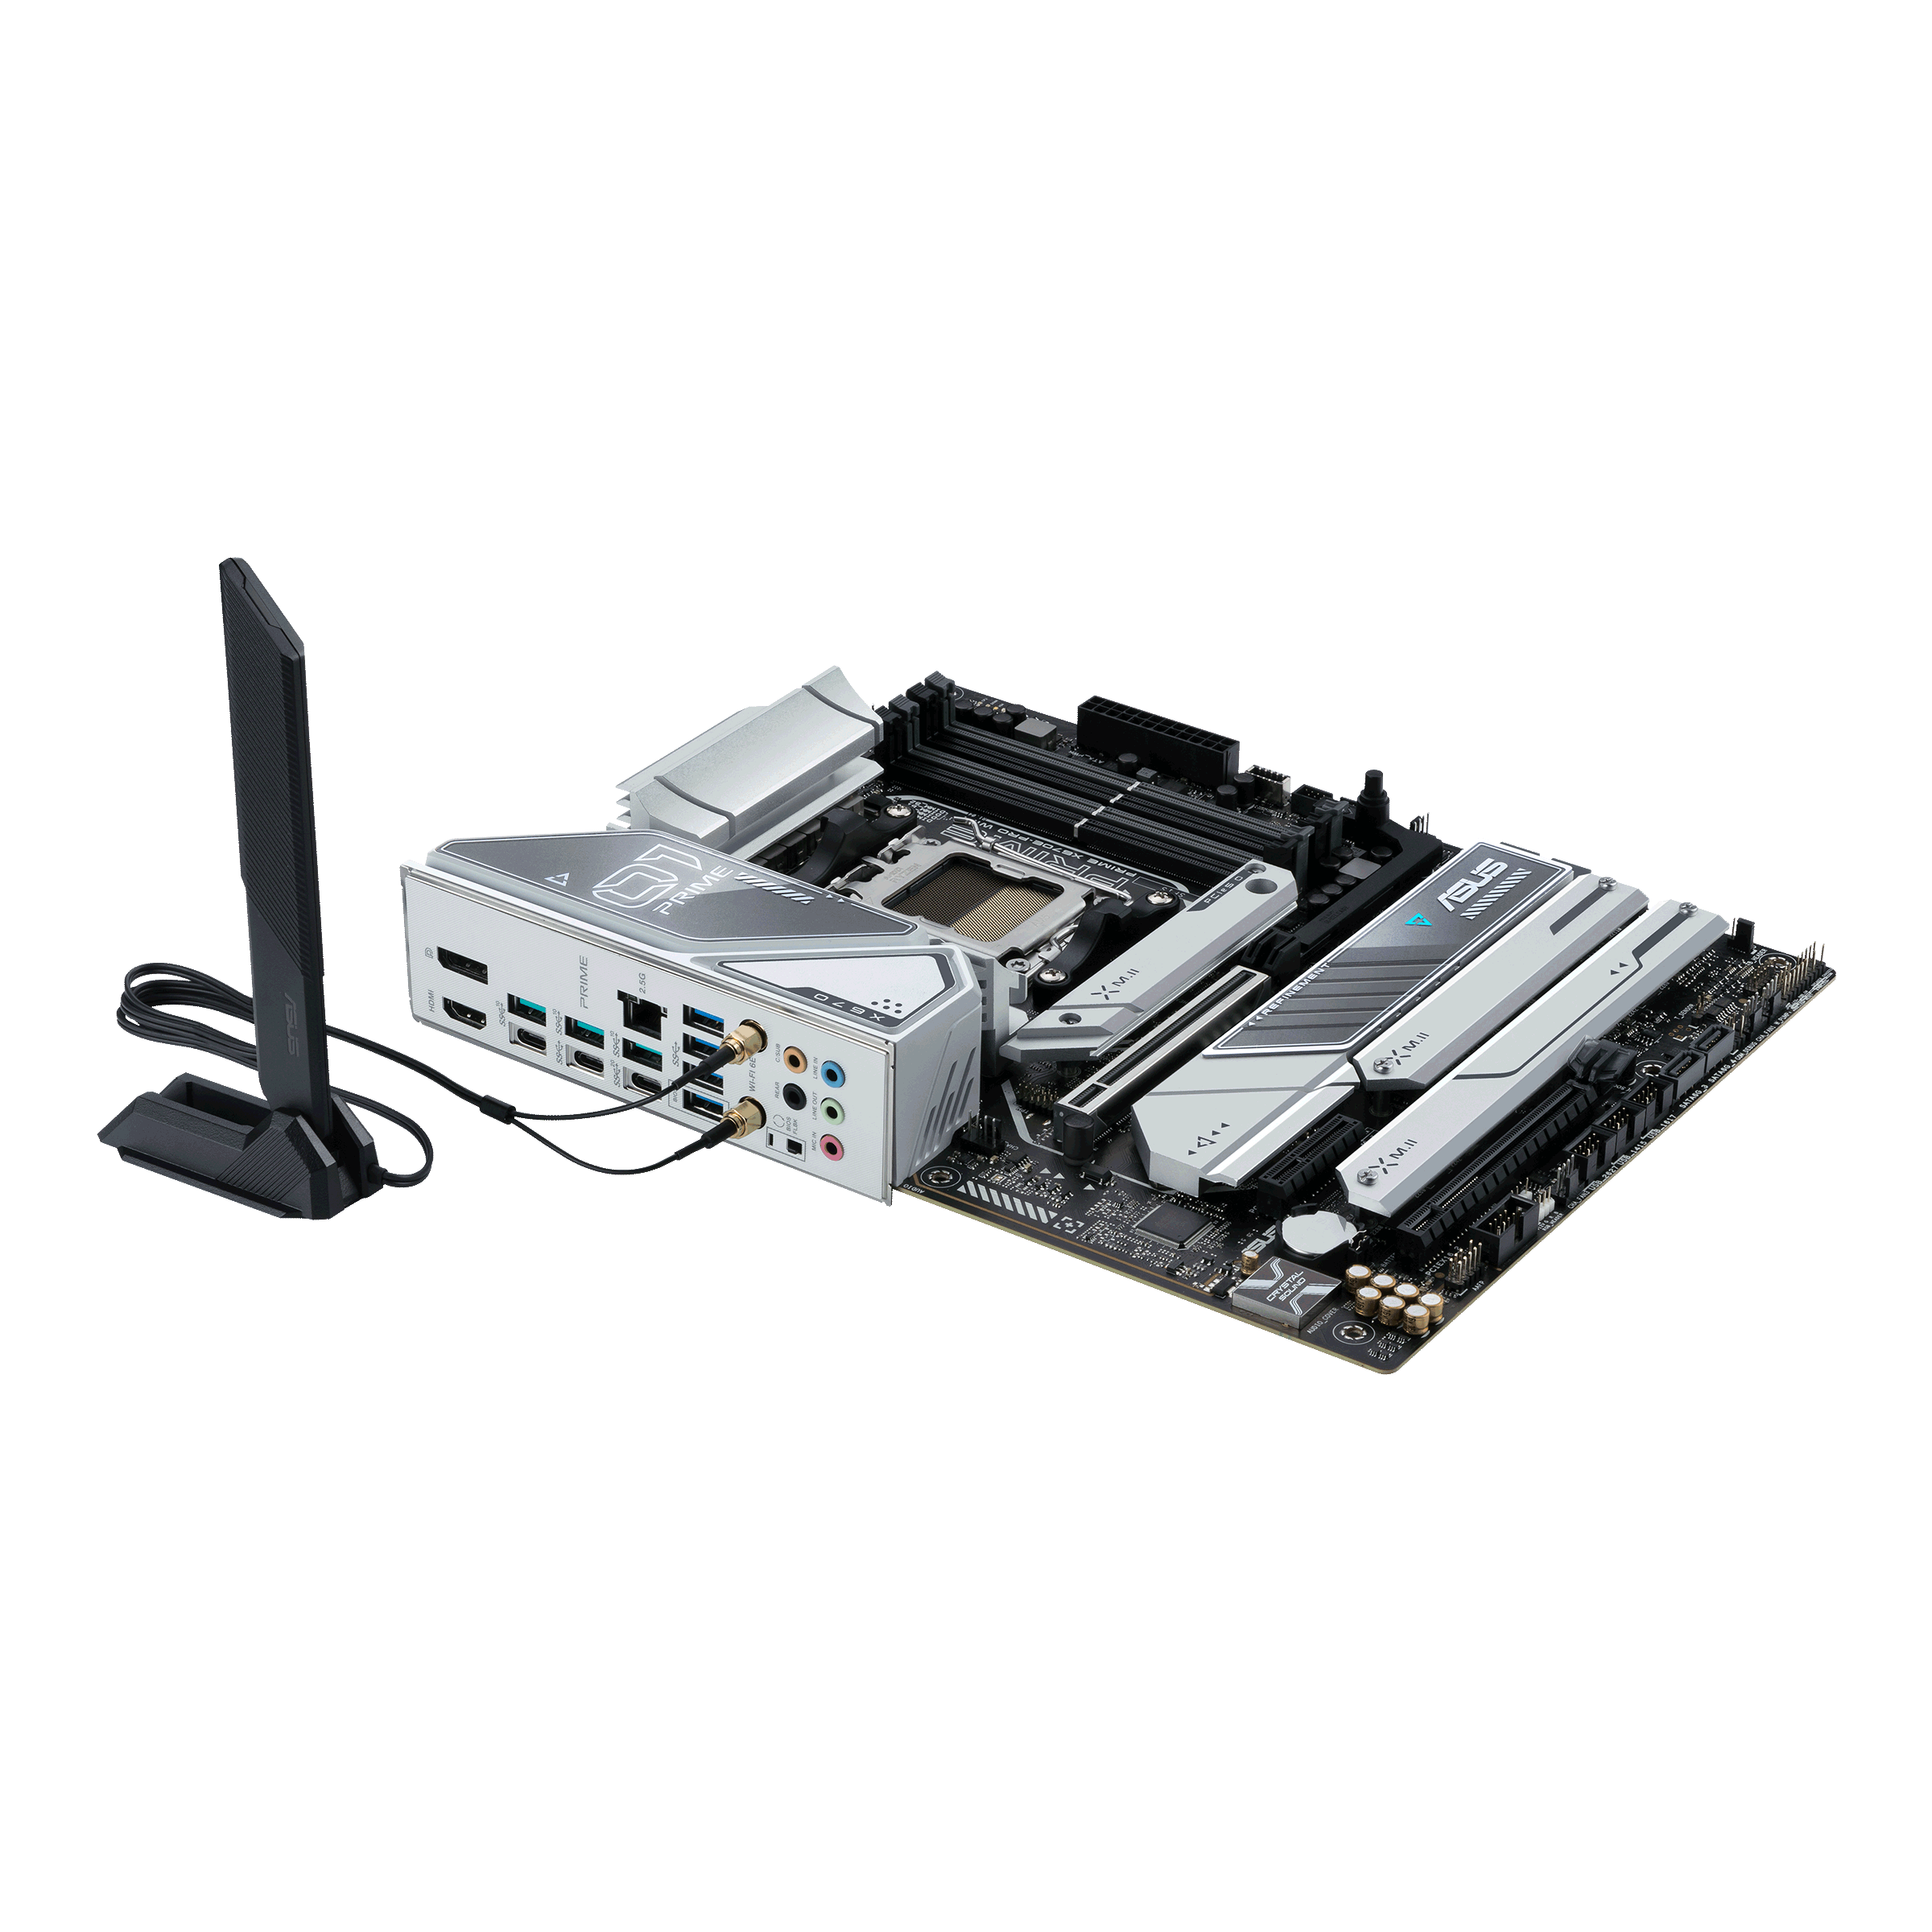 PRIME X670E-PRO WIFI-CSM｜Motherboards｜ASUS Global